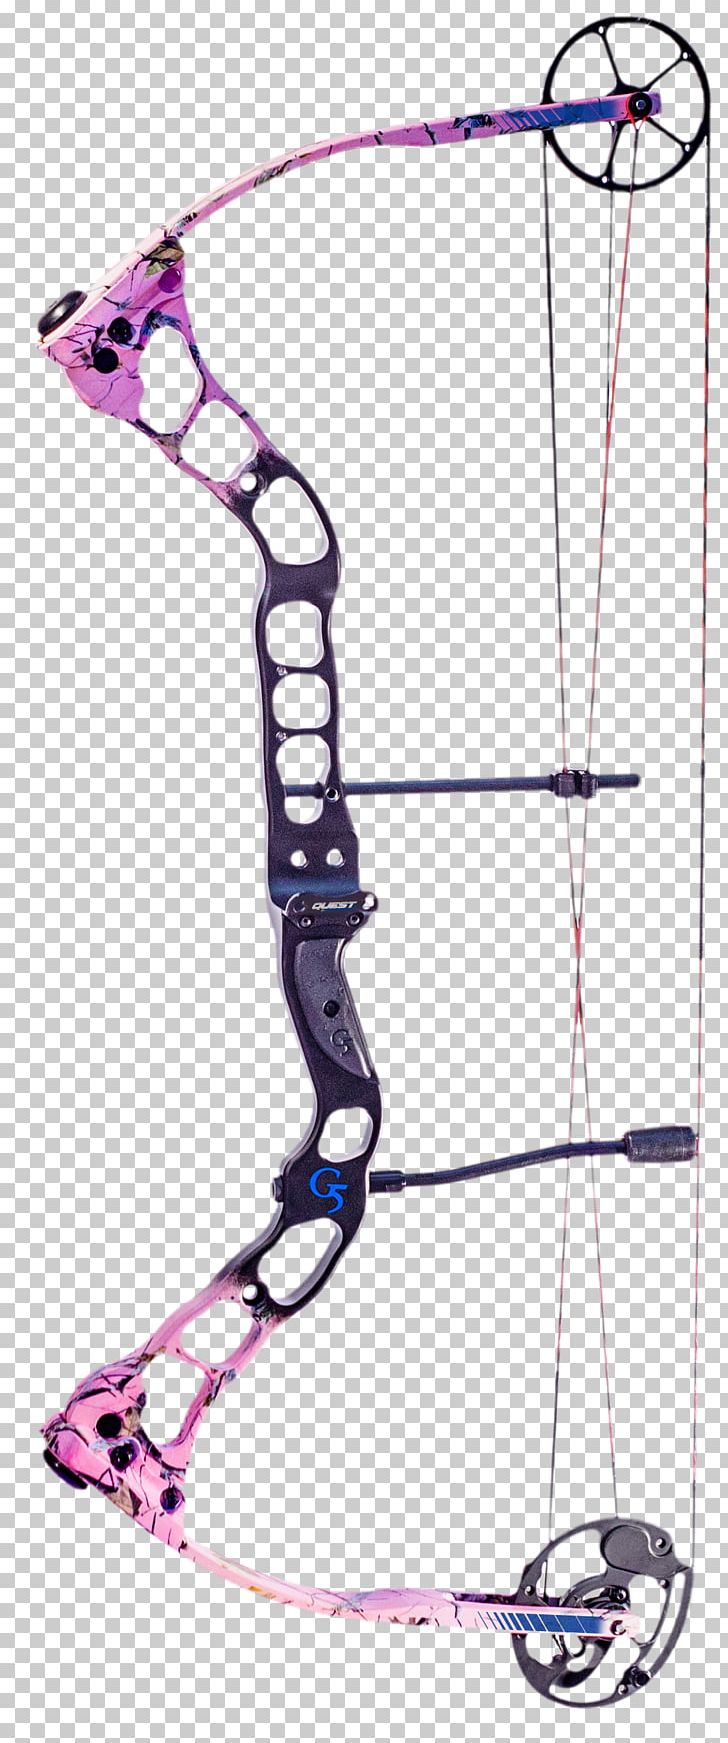 Compound Bows Bowhunting Bow And Arrow Archery PNG, Clipart, Archery, Arrow, Bear Archery, Bliss, Bow Free PNG Download